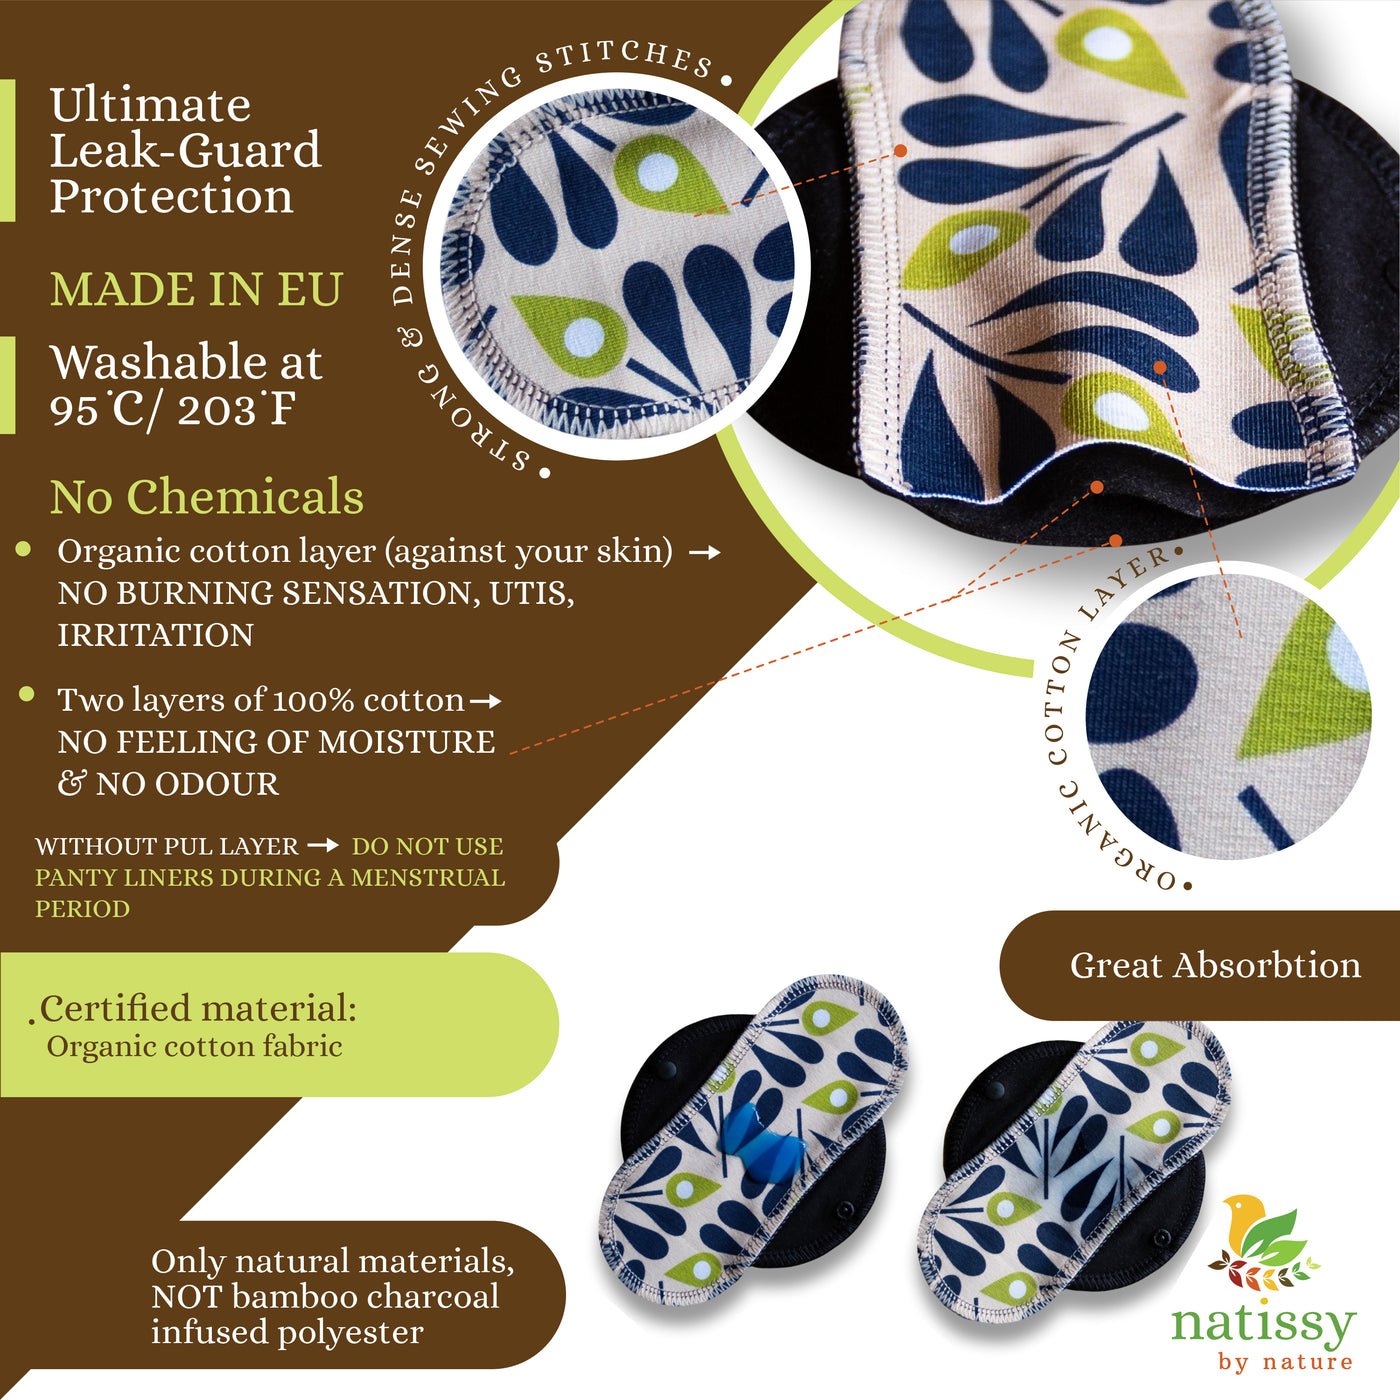 Reusable Panty liners, 7-Pack of Cotton Reusable Sanitary Pantyliners with Black Wings; MADE IN EU; for Vaginal Discharge and Everyday Cleanliness; Non-irritating, Anti-allergic, Antibacterial; for Daily Usage and in case of White Discharge; Washable Cloth Pads w/o Chemicals; Reusable Liners